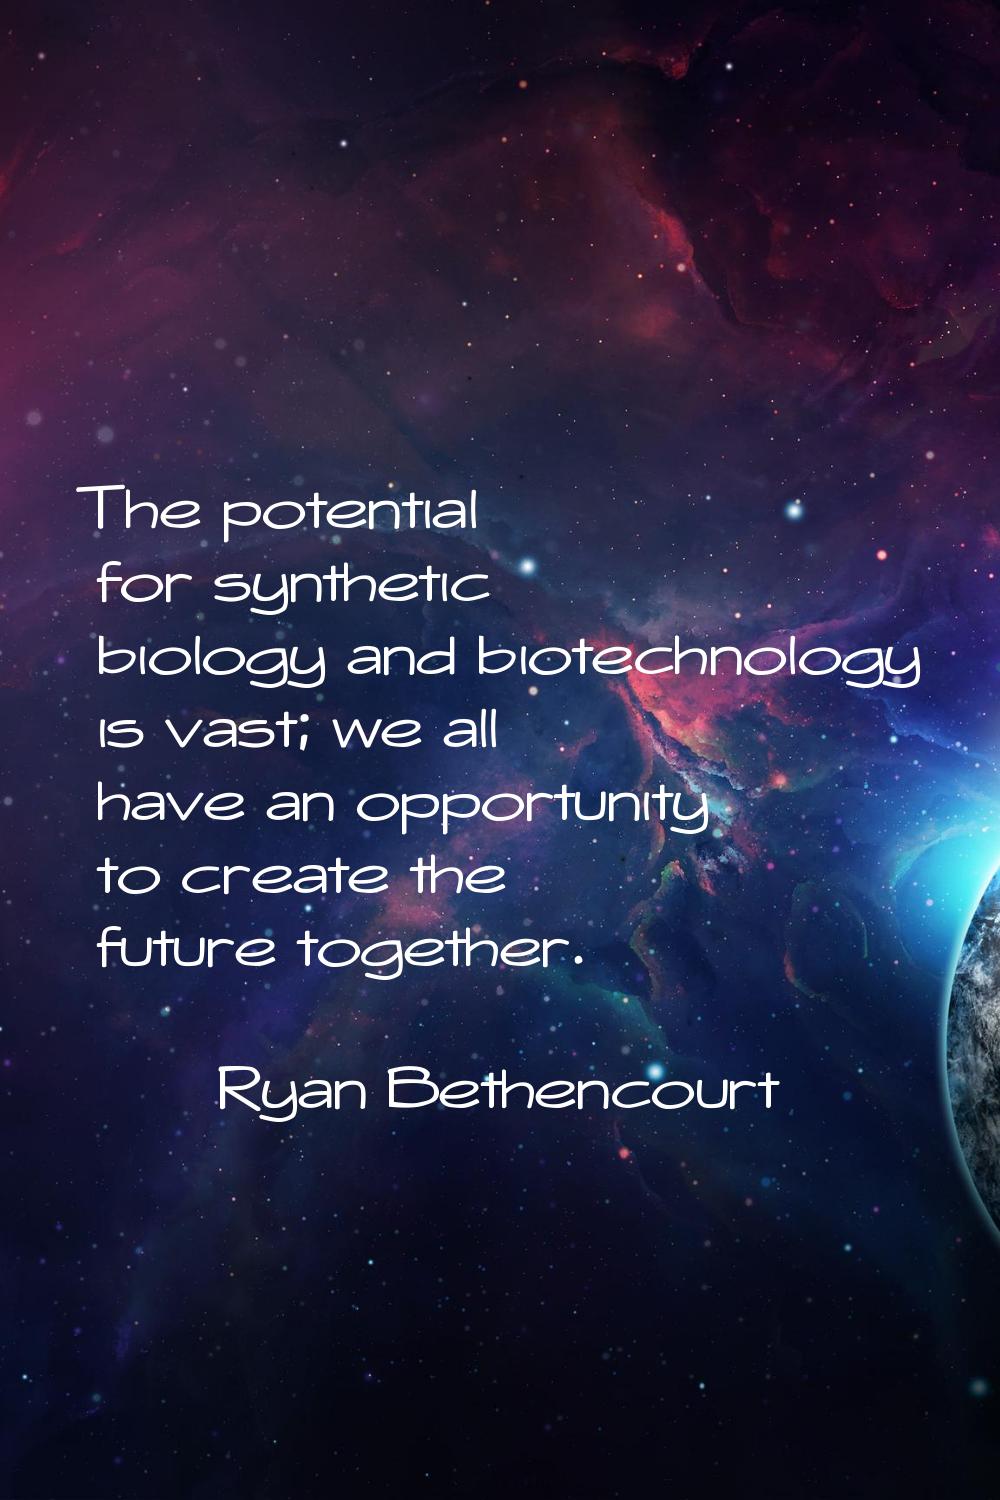 The potential for synthetic biology and biotechnology is vast; we all have an opportunity to create